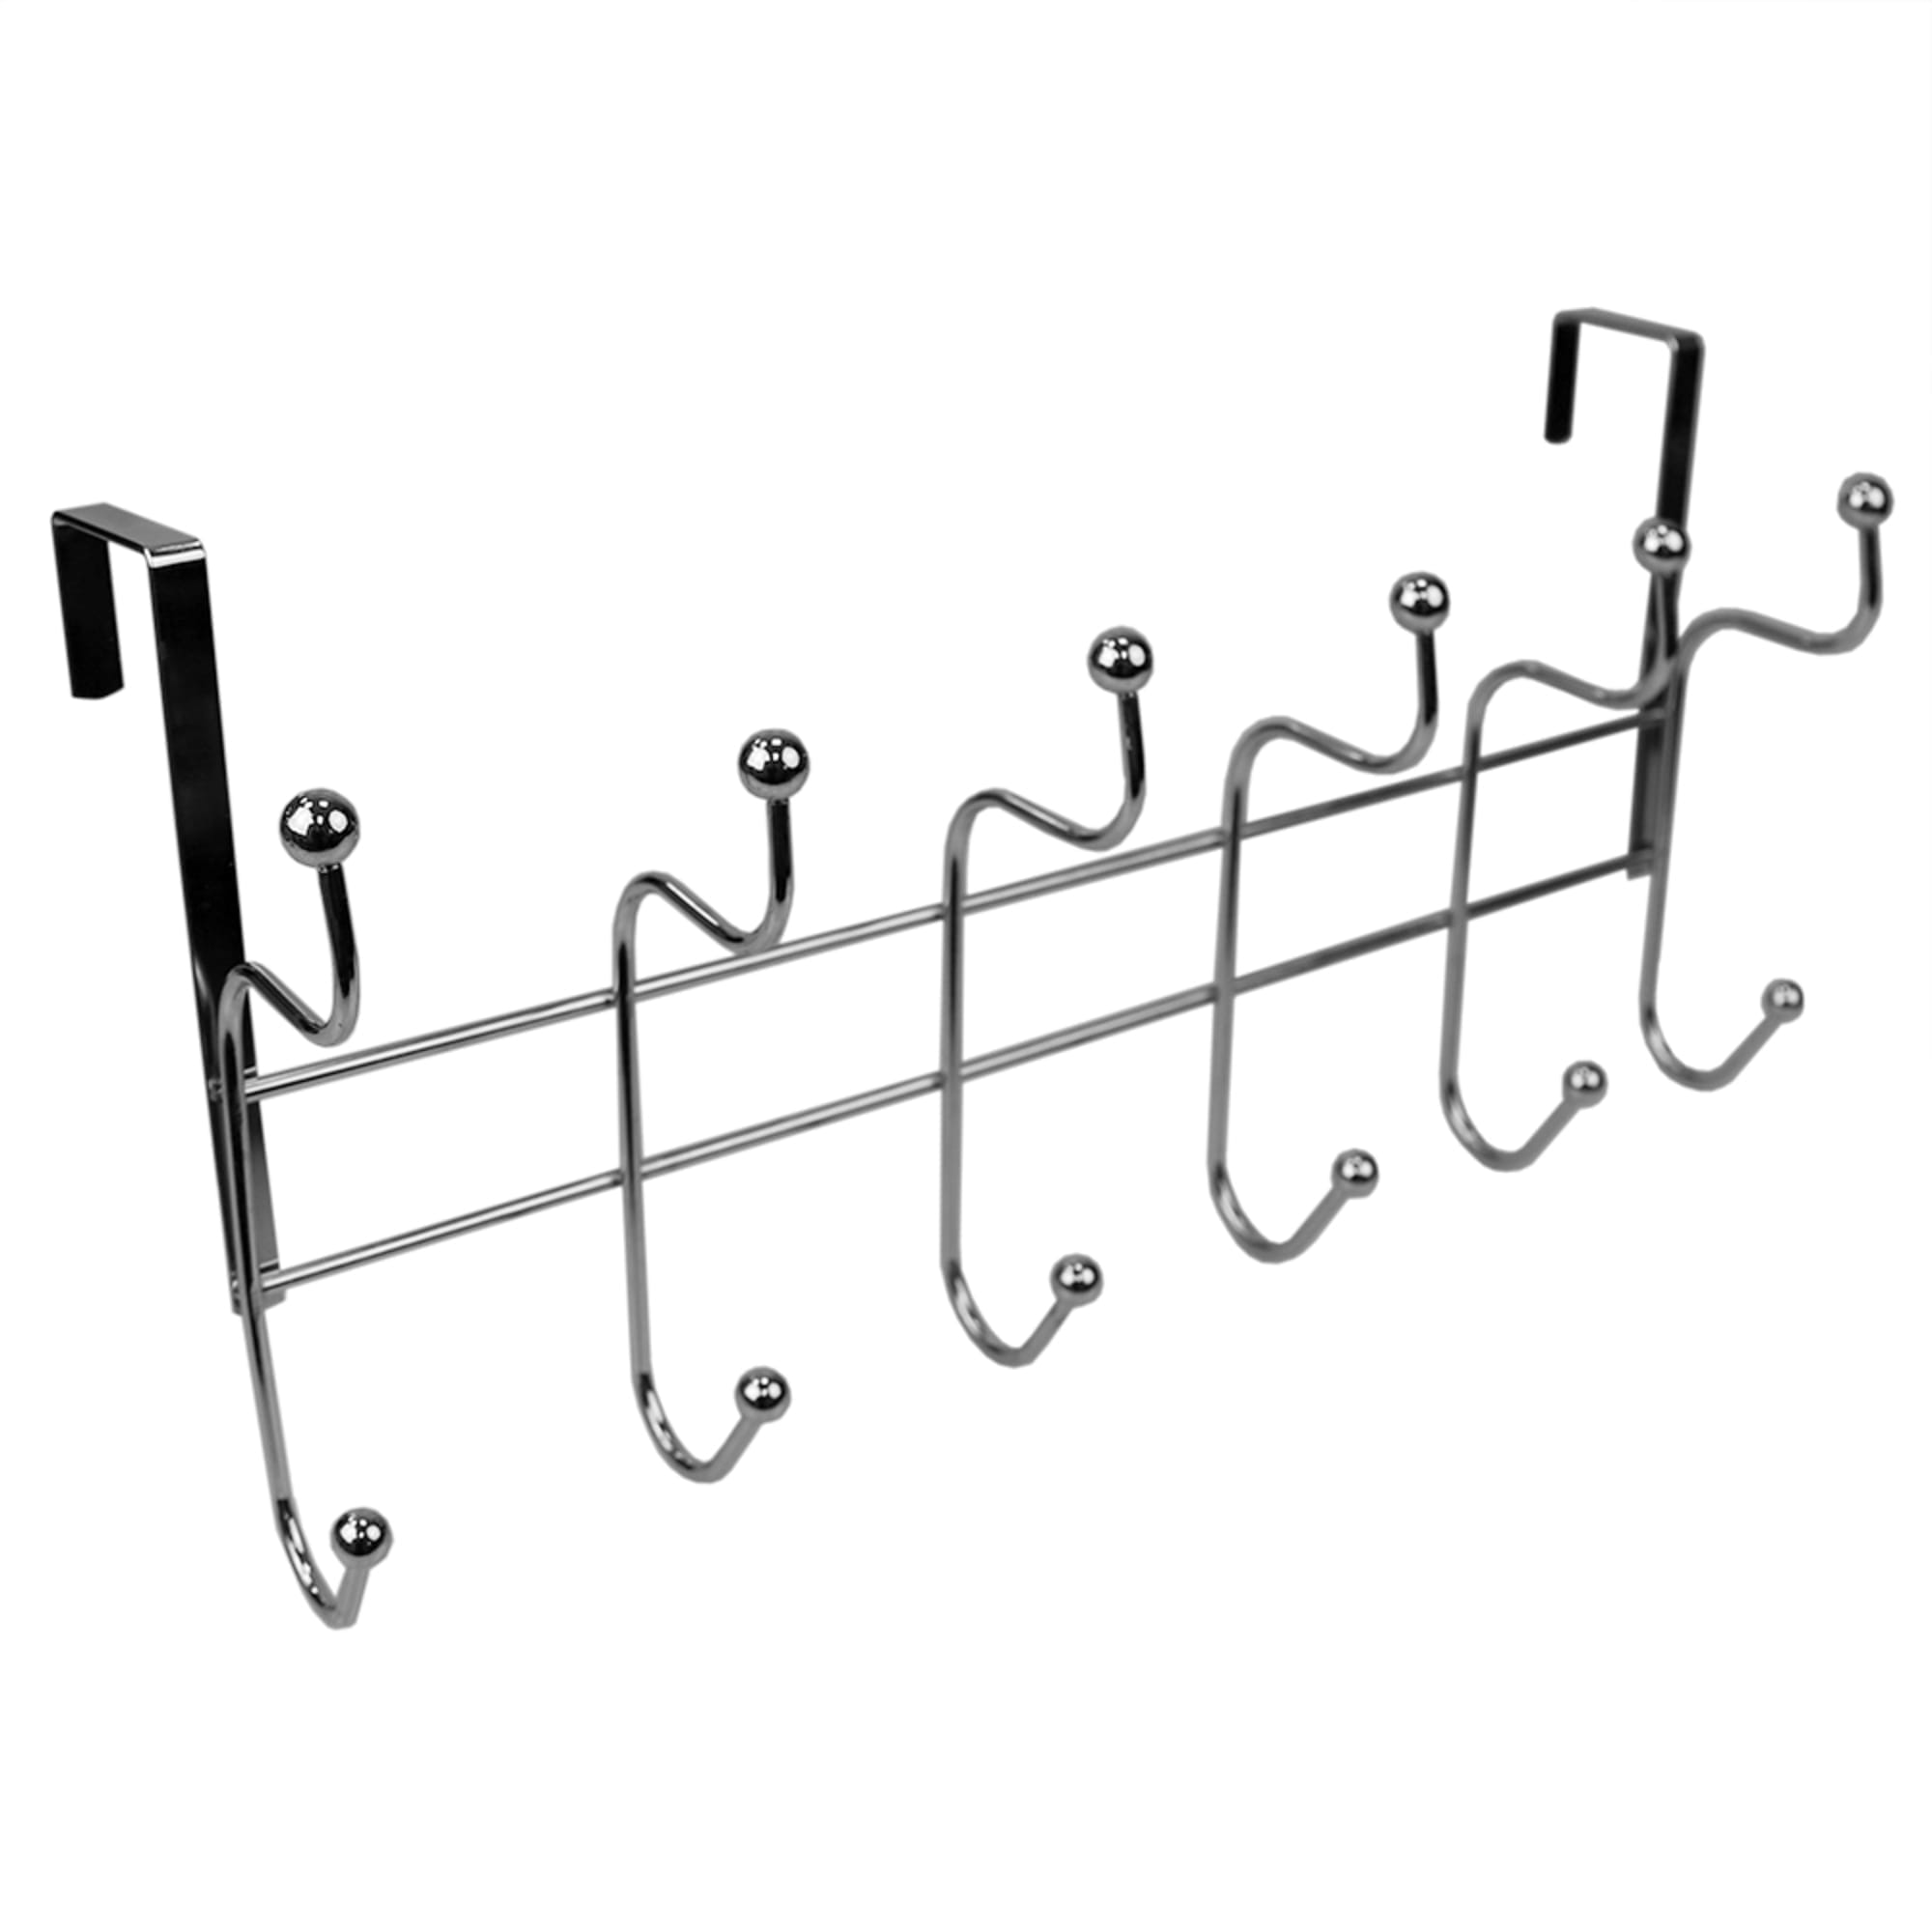 Home Basics Nico 6 Hook Over the Door Hanging Rack, Chrome $6.00 EACH, CASE PACK OF 12